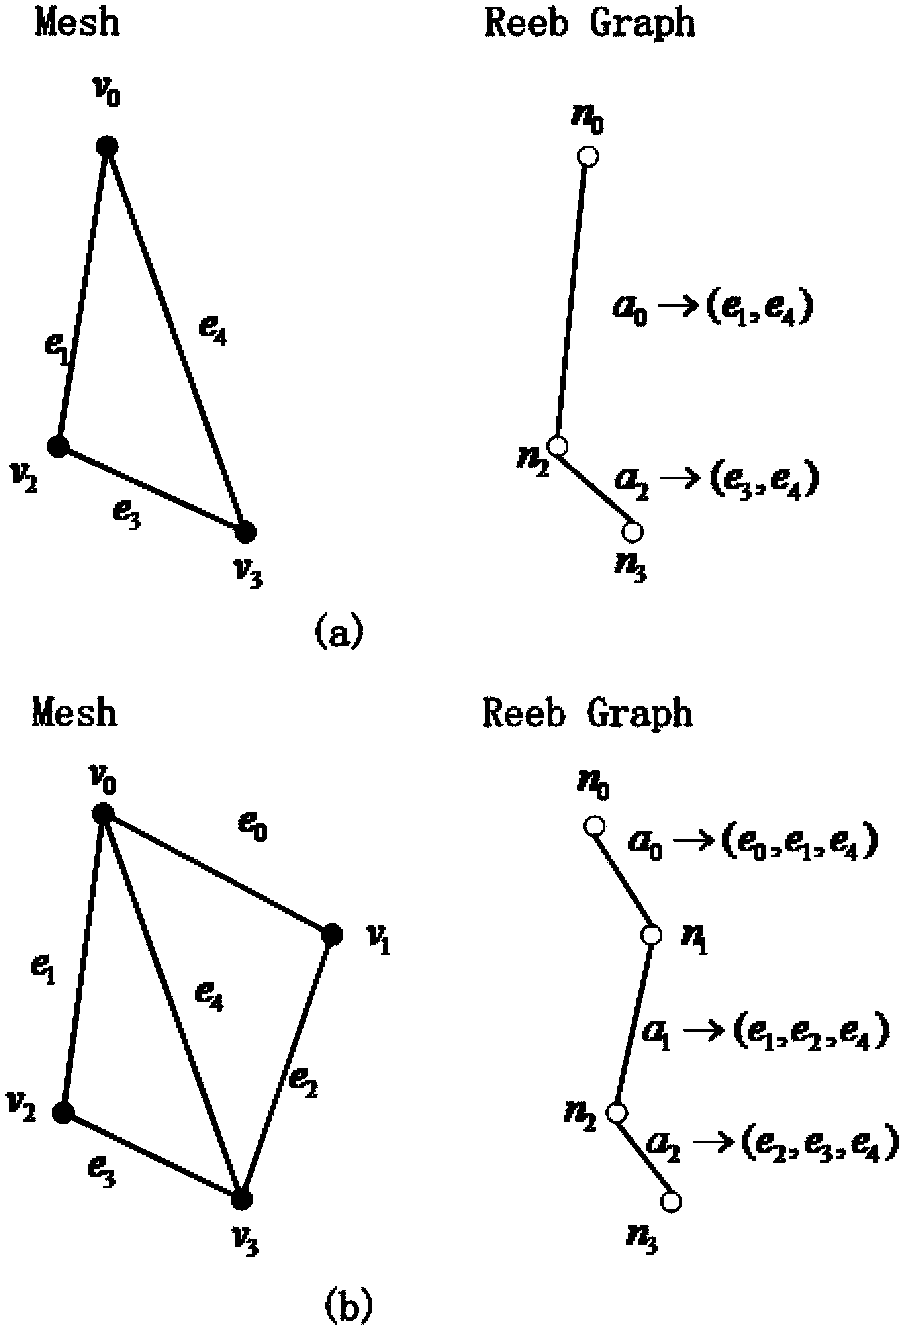 Three-dimensional topological information extraction method based on Reeb graph description